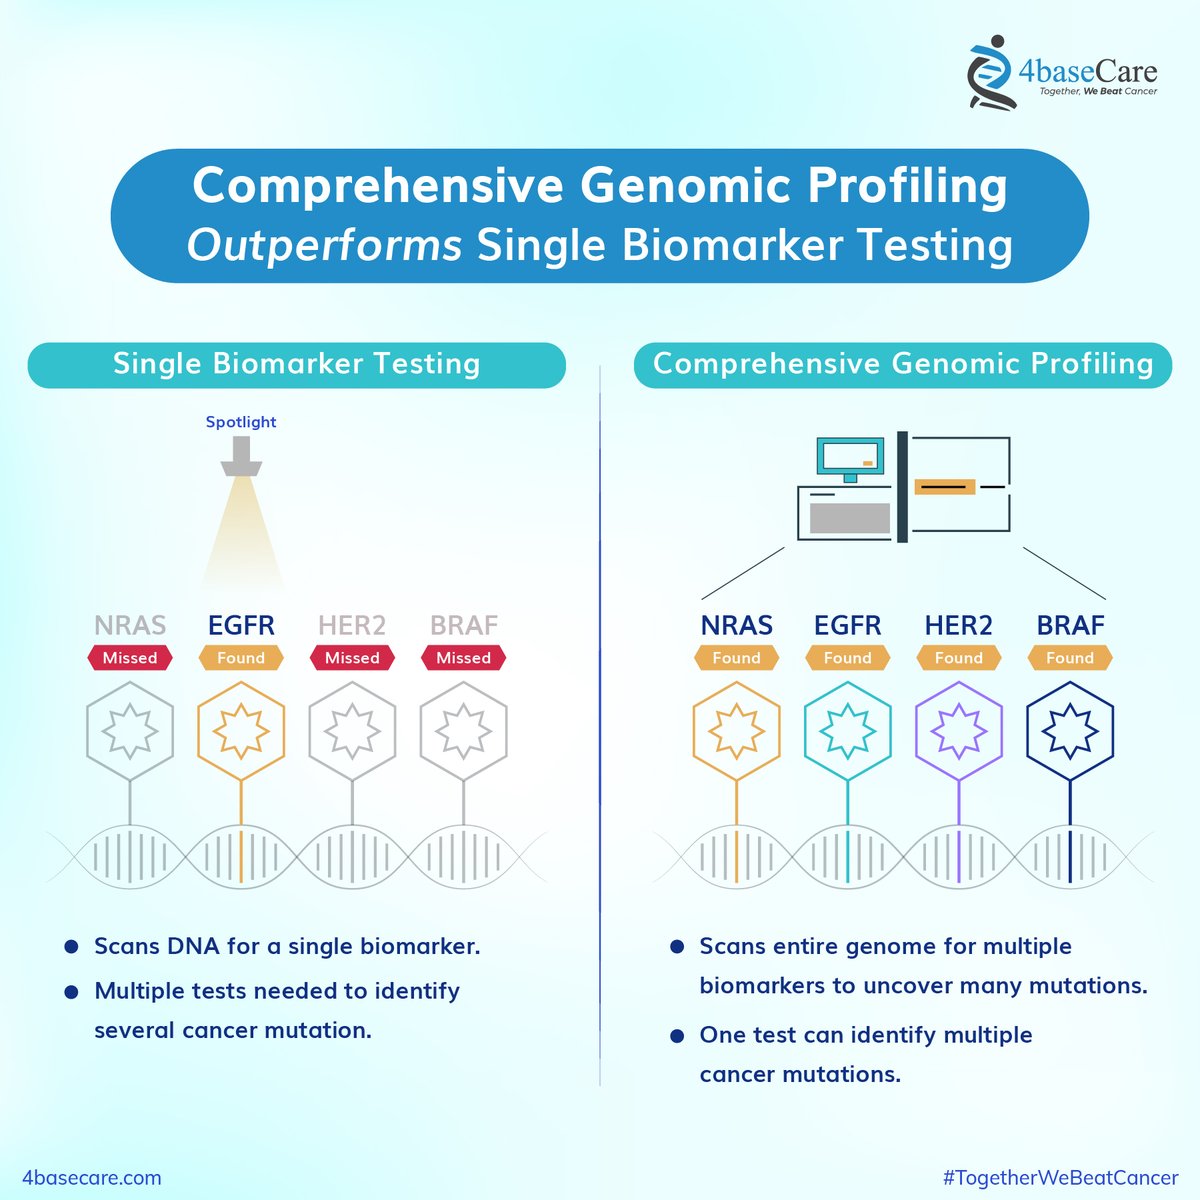 Compared to Comprehensive Genomic Profiling (CGP), single-gene assays are limited to a single biomarker. In contrast, #CGP uncovers many mutations while scanning genomes for multiple biomarkers.

#Genomics #PrecisionMedicine #FDAODAC #ngs #mutations #Cancer #cancerfreeindia